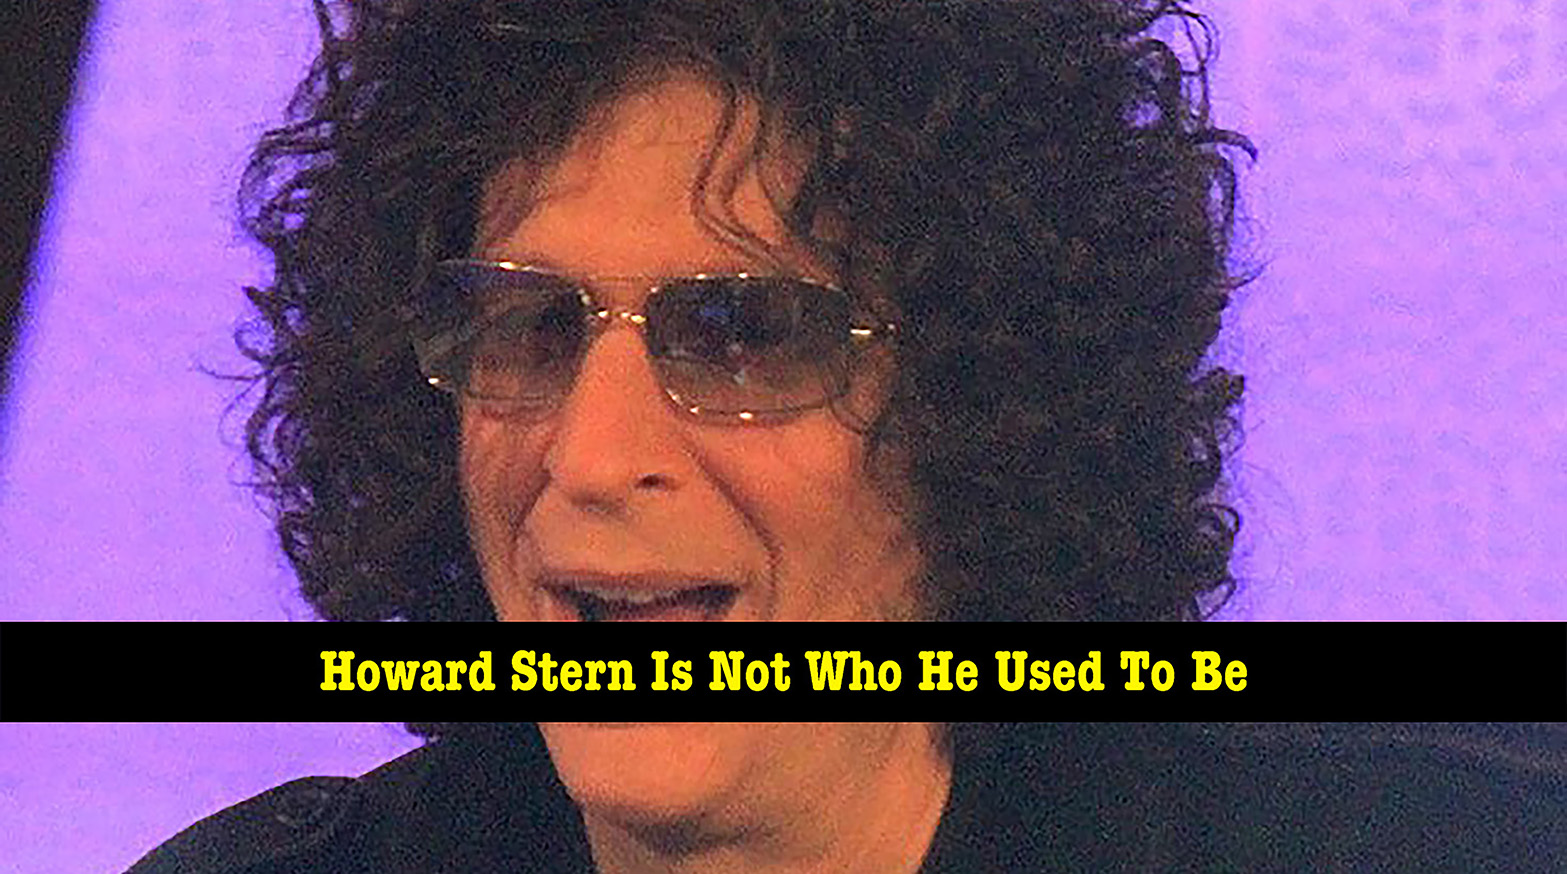 What Happened to Howard Stern?